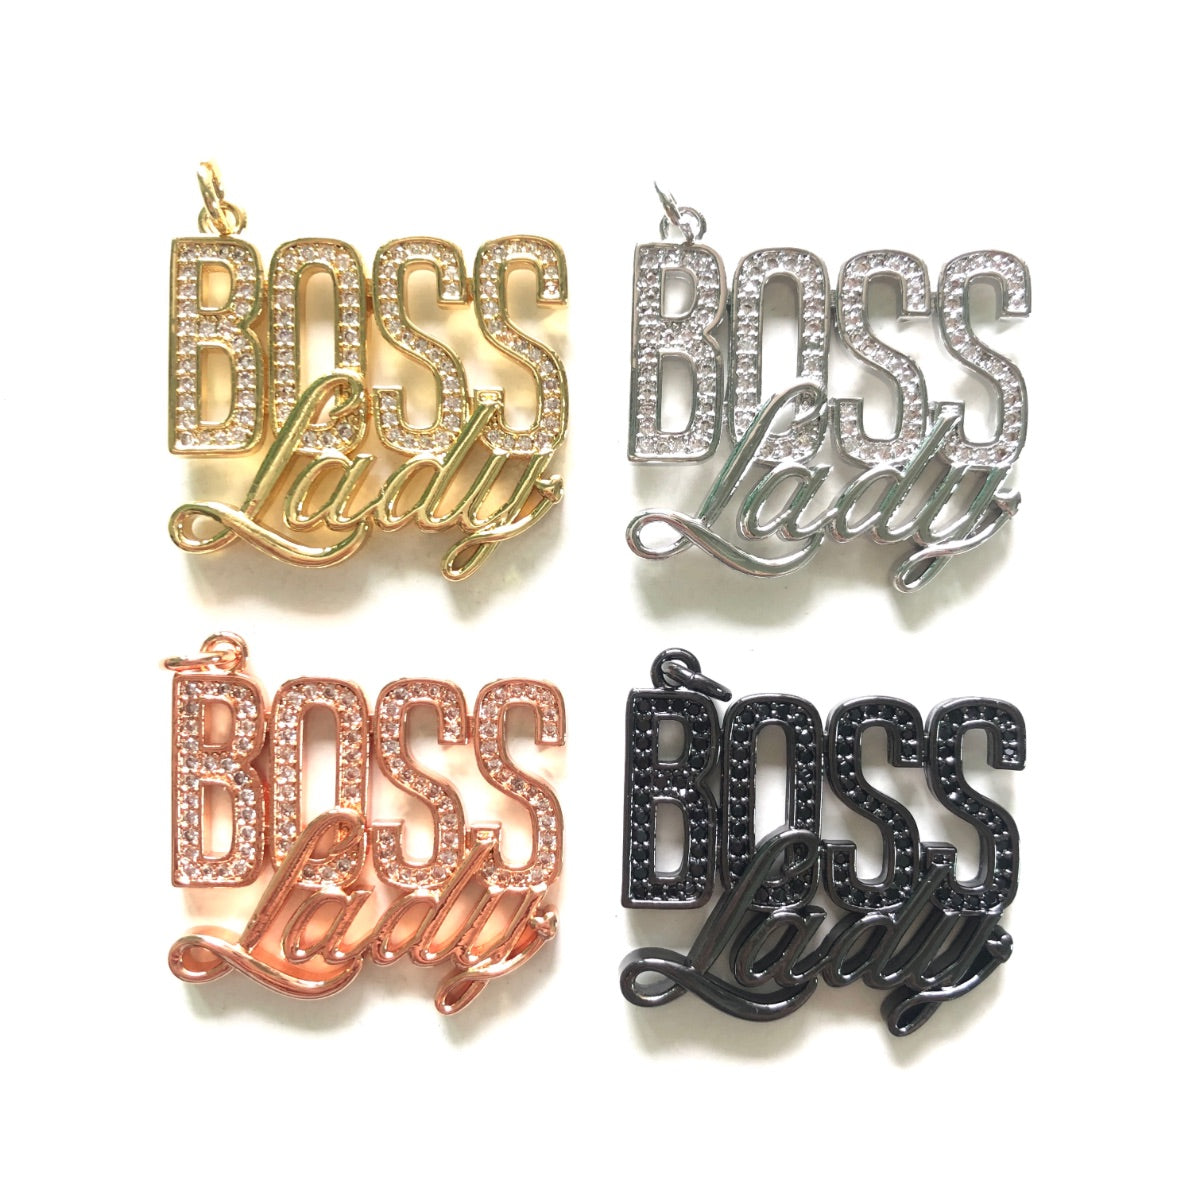 10pcs/lot 31*27.5mm CZ Pave Boss Lady Word Charms CZ Paved Charms New Charms Arrivals Words & Quotes Charms Beads Beyond